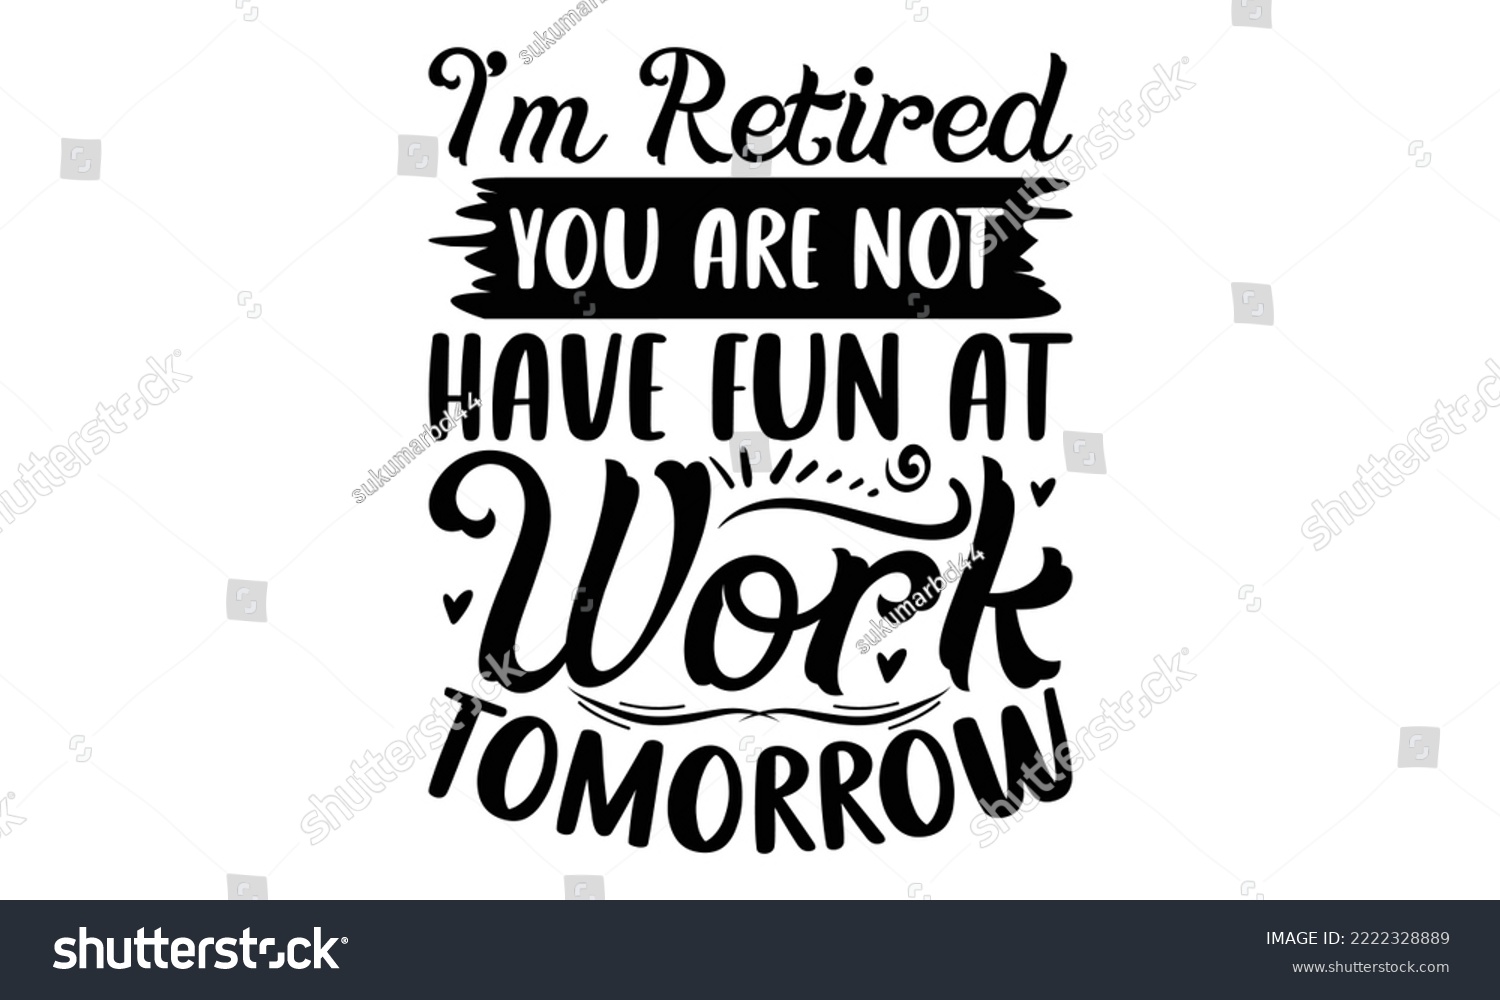 SVG of I’m Retired You Are Not Have Fun At Work Tomorrow - Retirement SVG Design, Hand drawn lettering phrase isolated on white background, typography t shirt design, eps, Files for Cutting svg